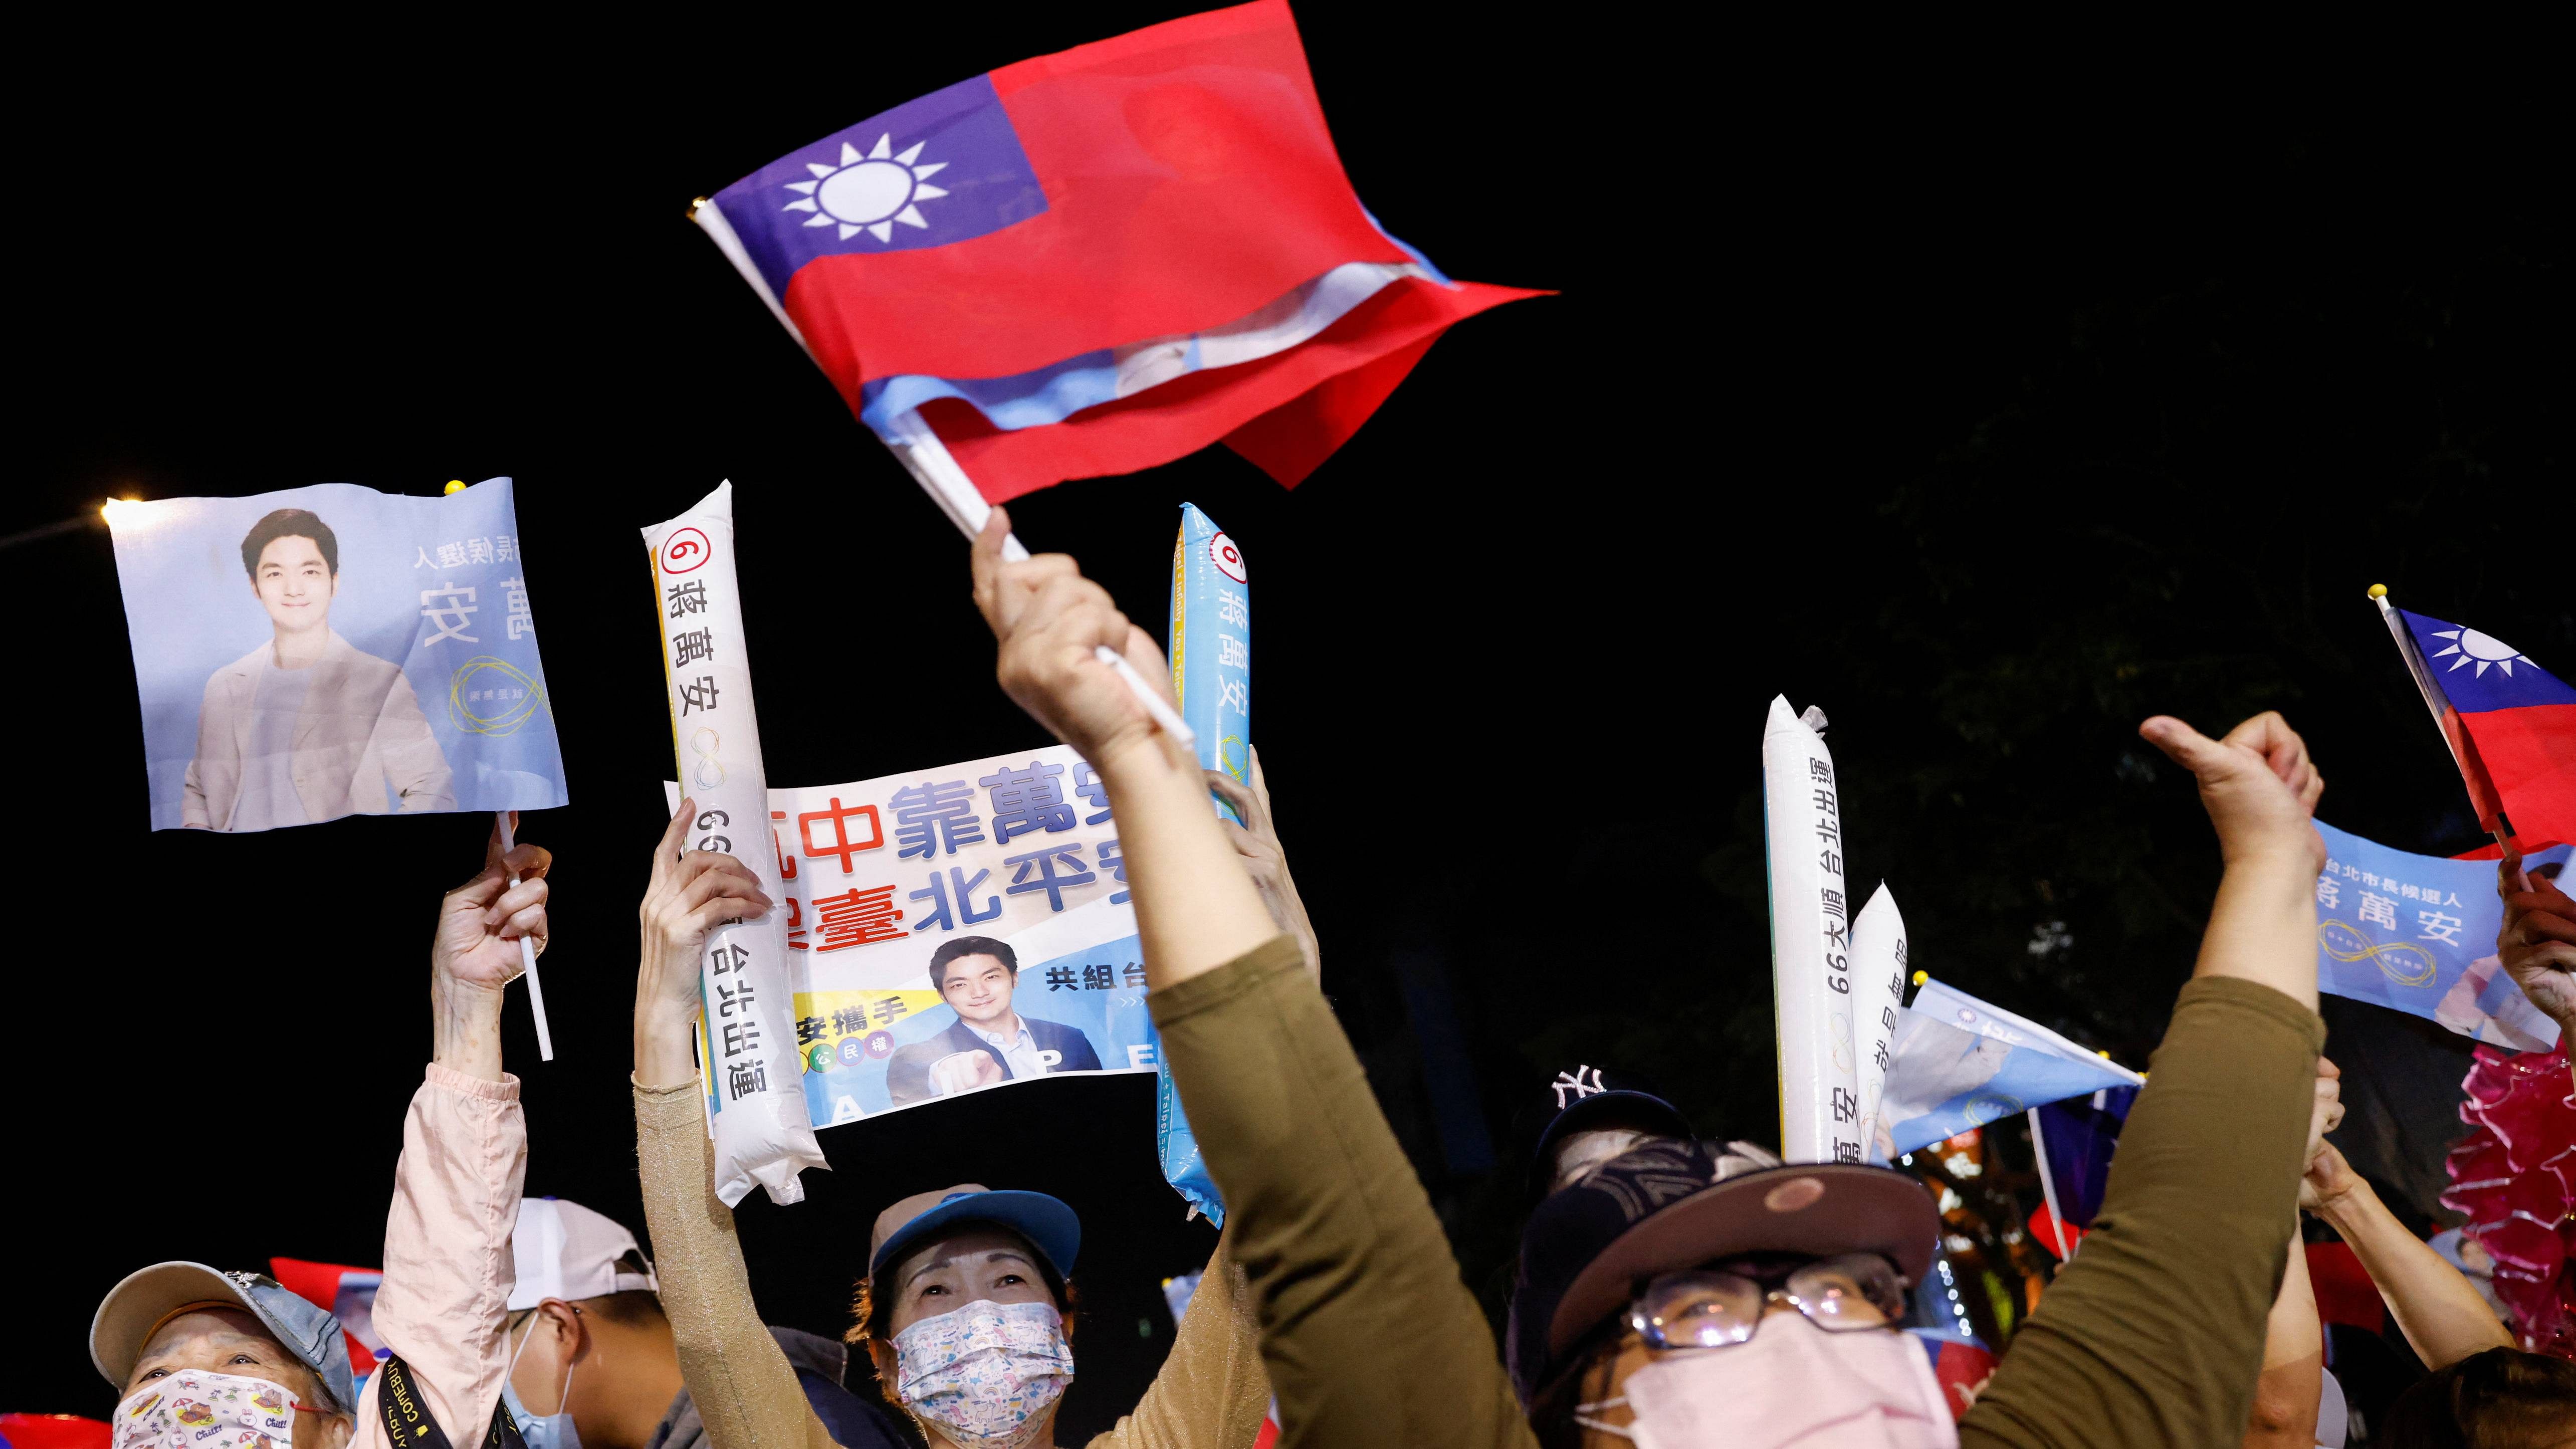 Supporters of the opposition party Kuomintang (KMT) celebrate the preliminary results of the local elections during a rally in Taiwan. Credit: Reuters Photo